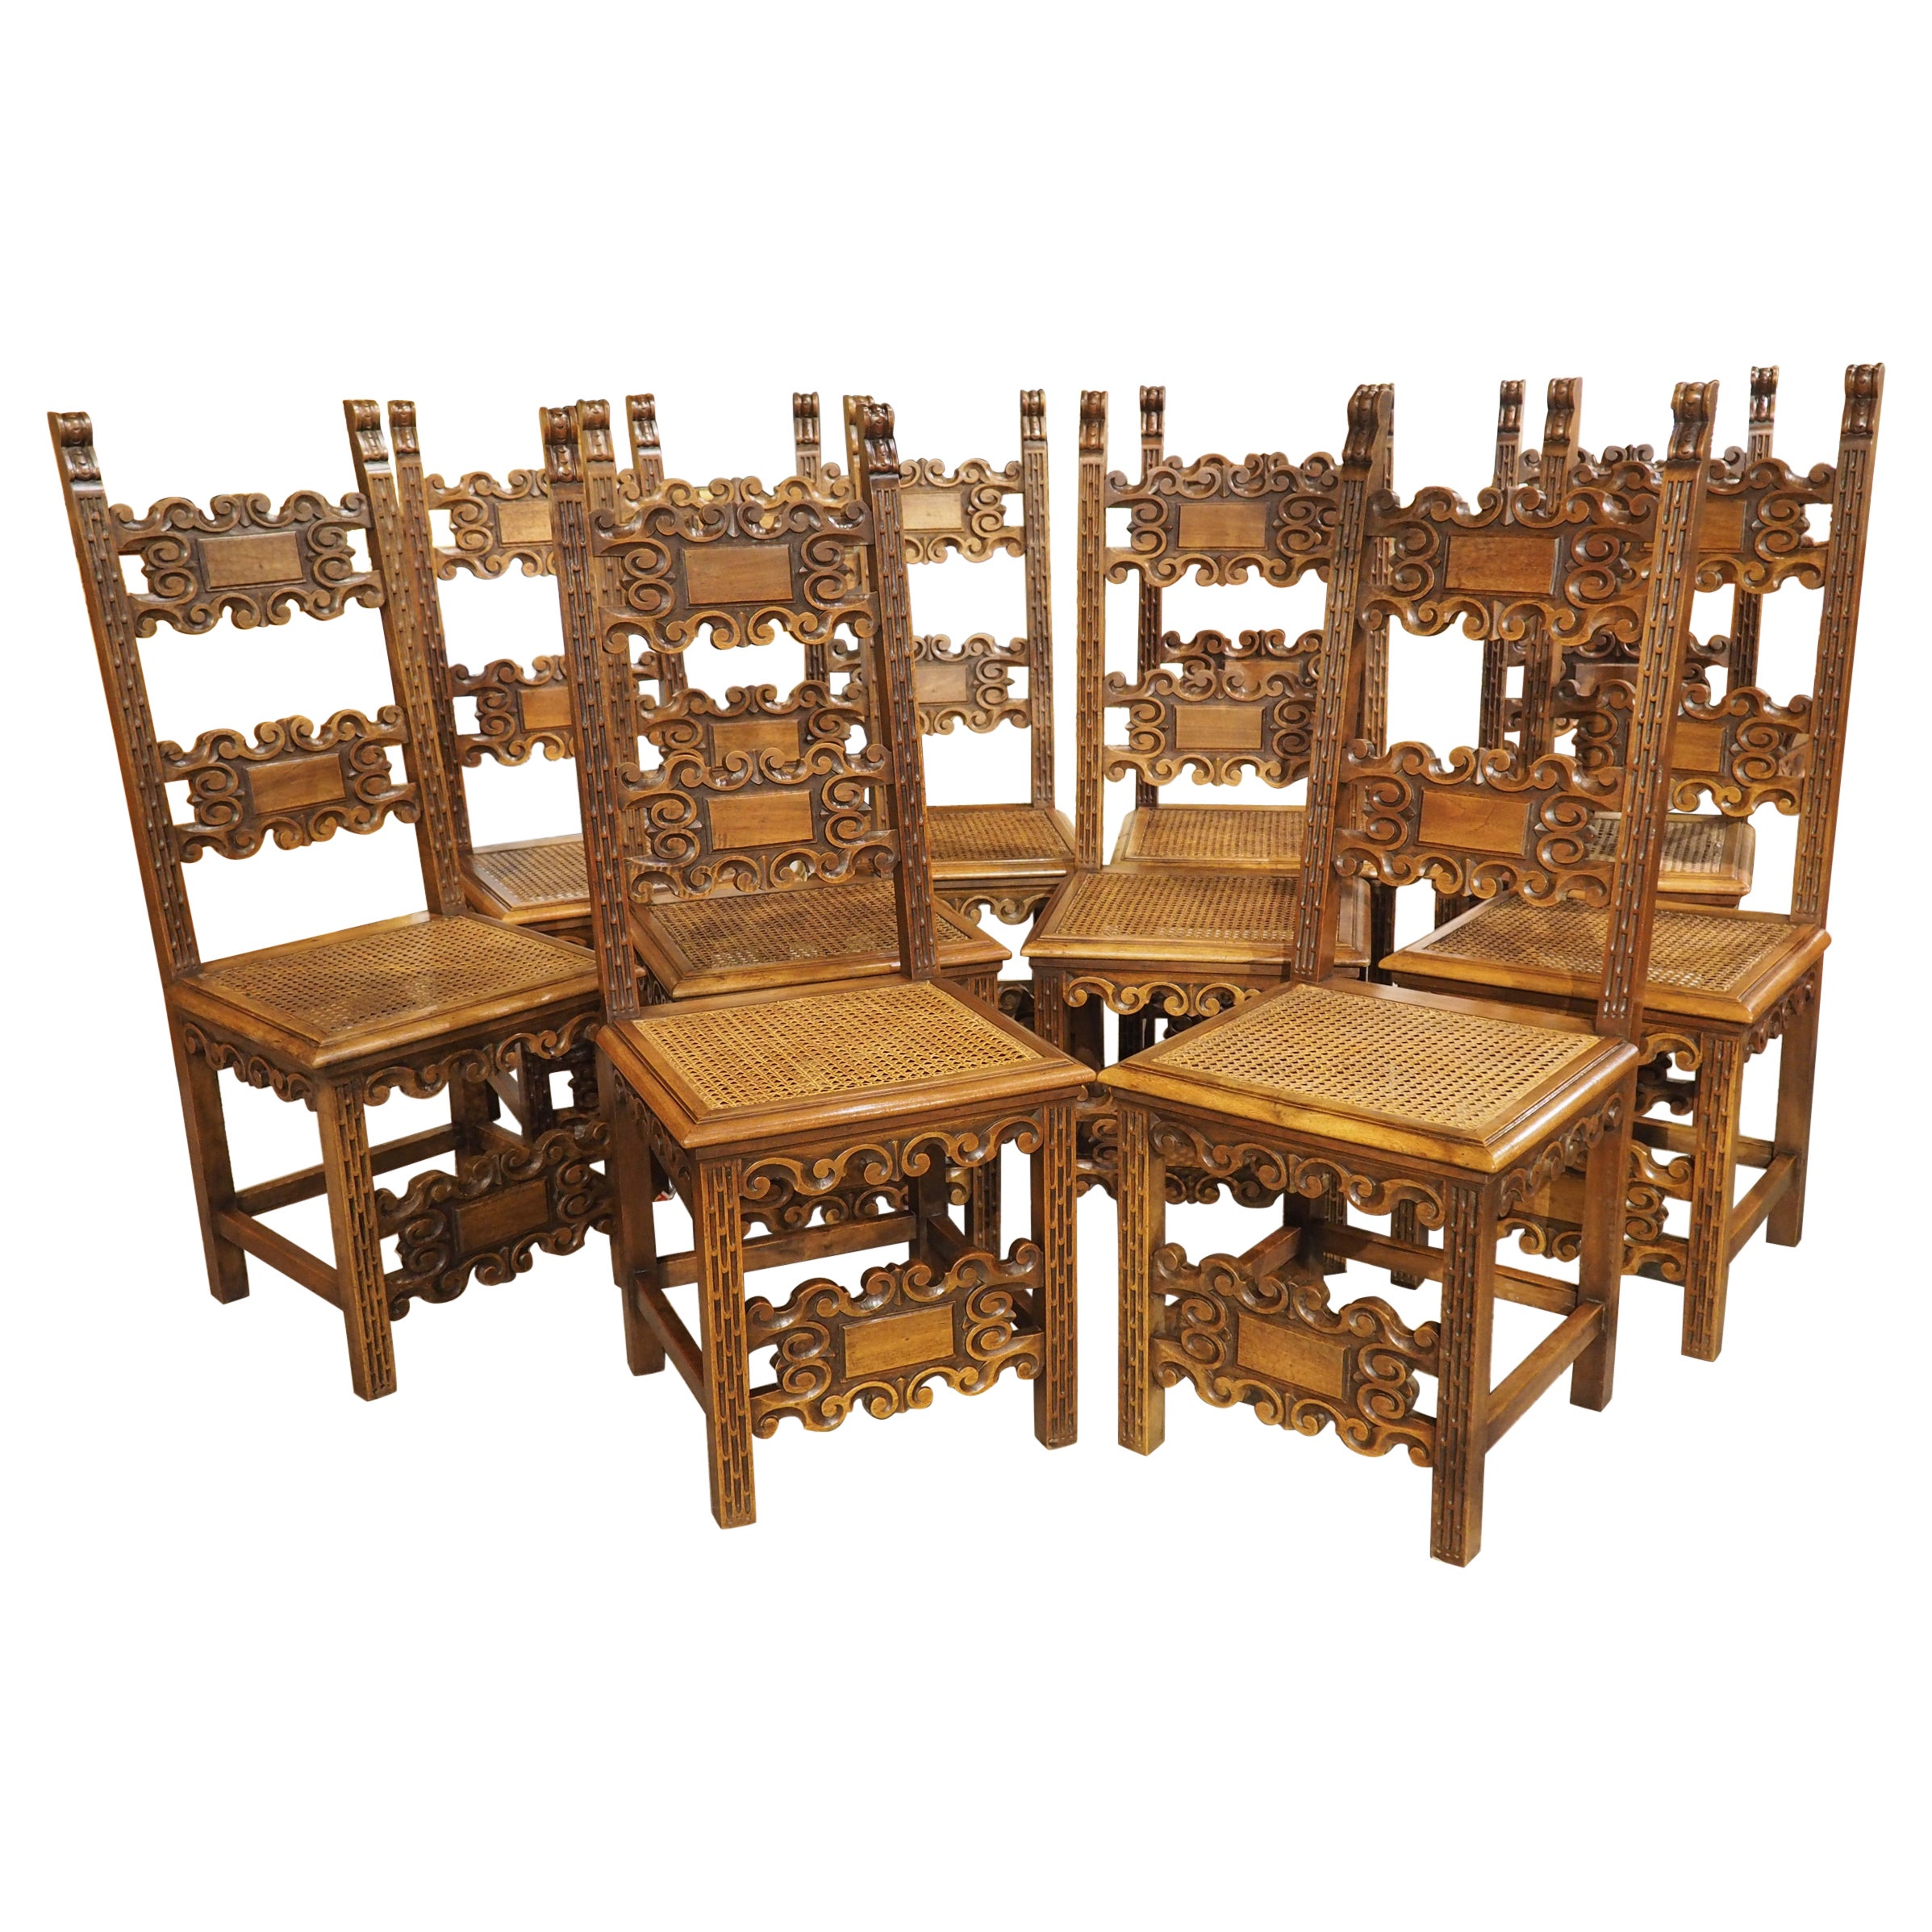 Set of 10 Antique Italian Carved Walnut and Caned Dining Chairs, Circa 1880